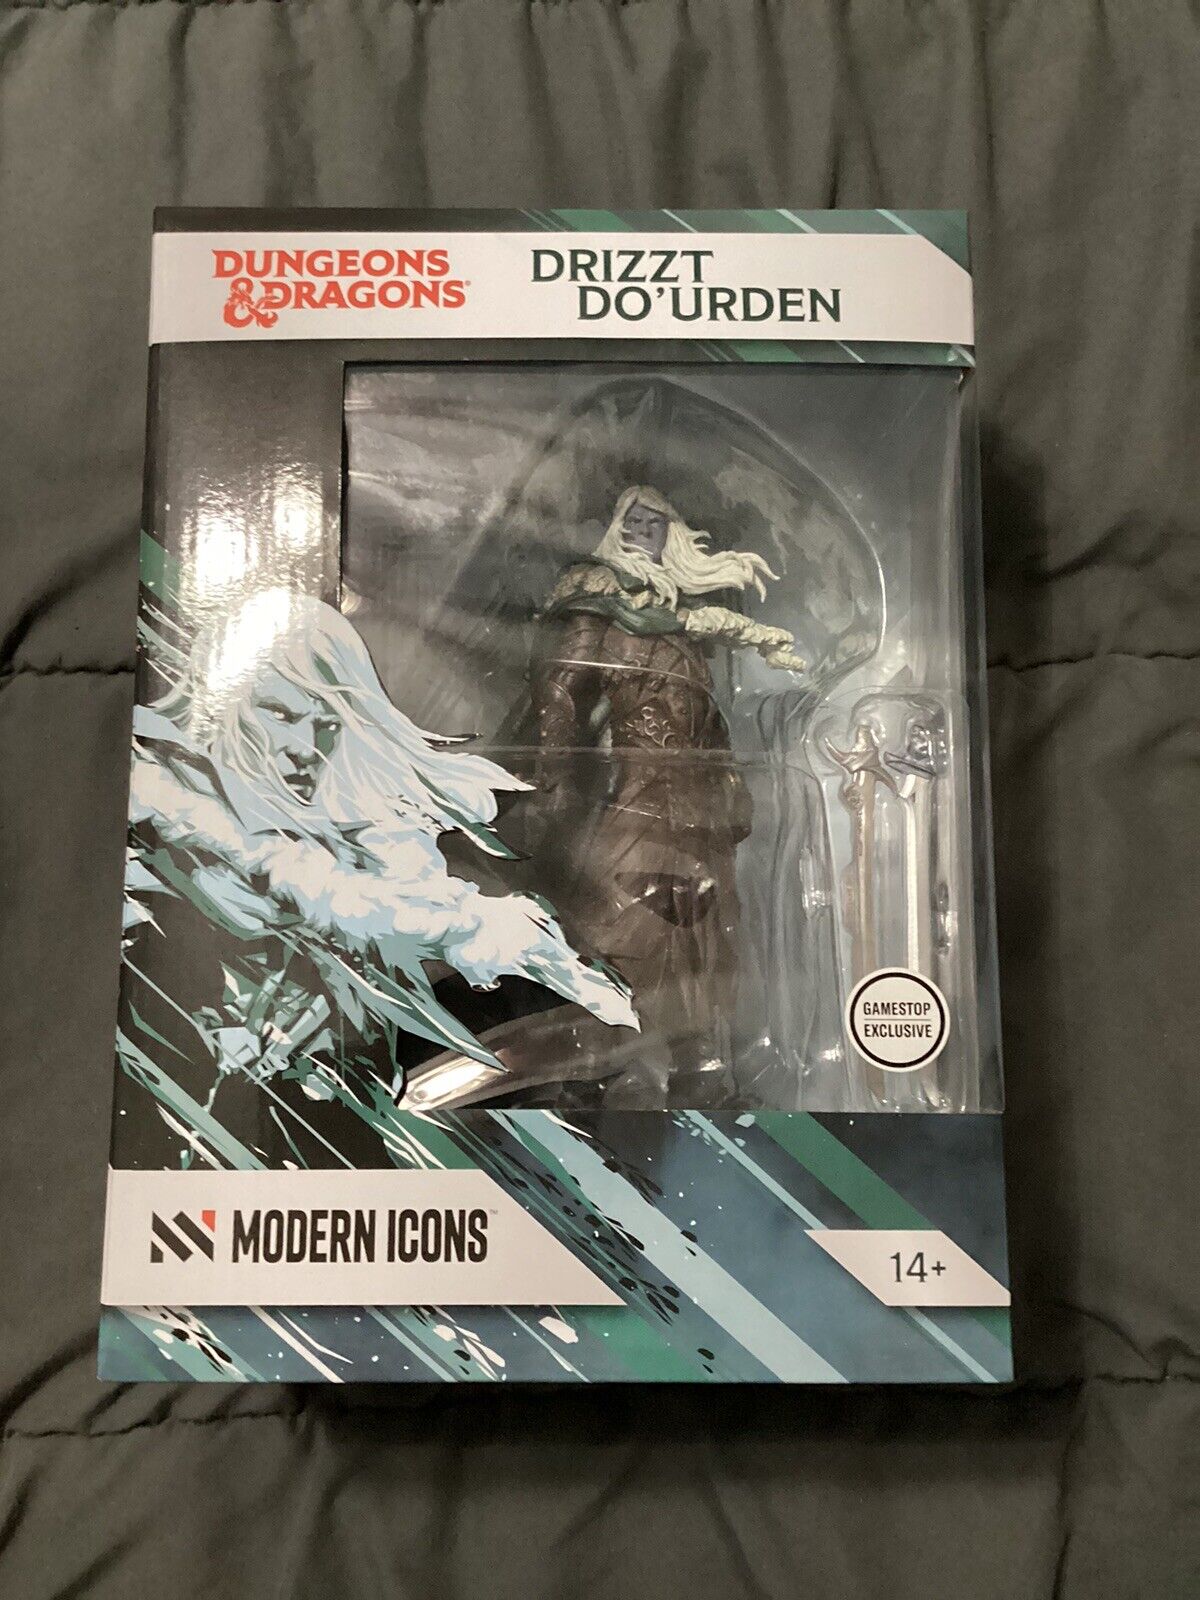 Drizzt Do\'Urden Modern Icons GameStop Exclusive Dungeons and Dragons Statue